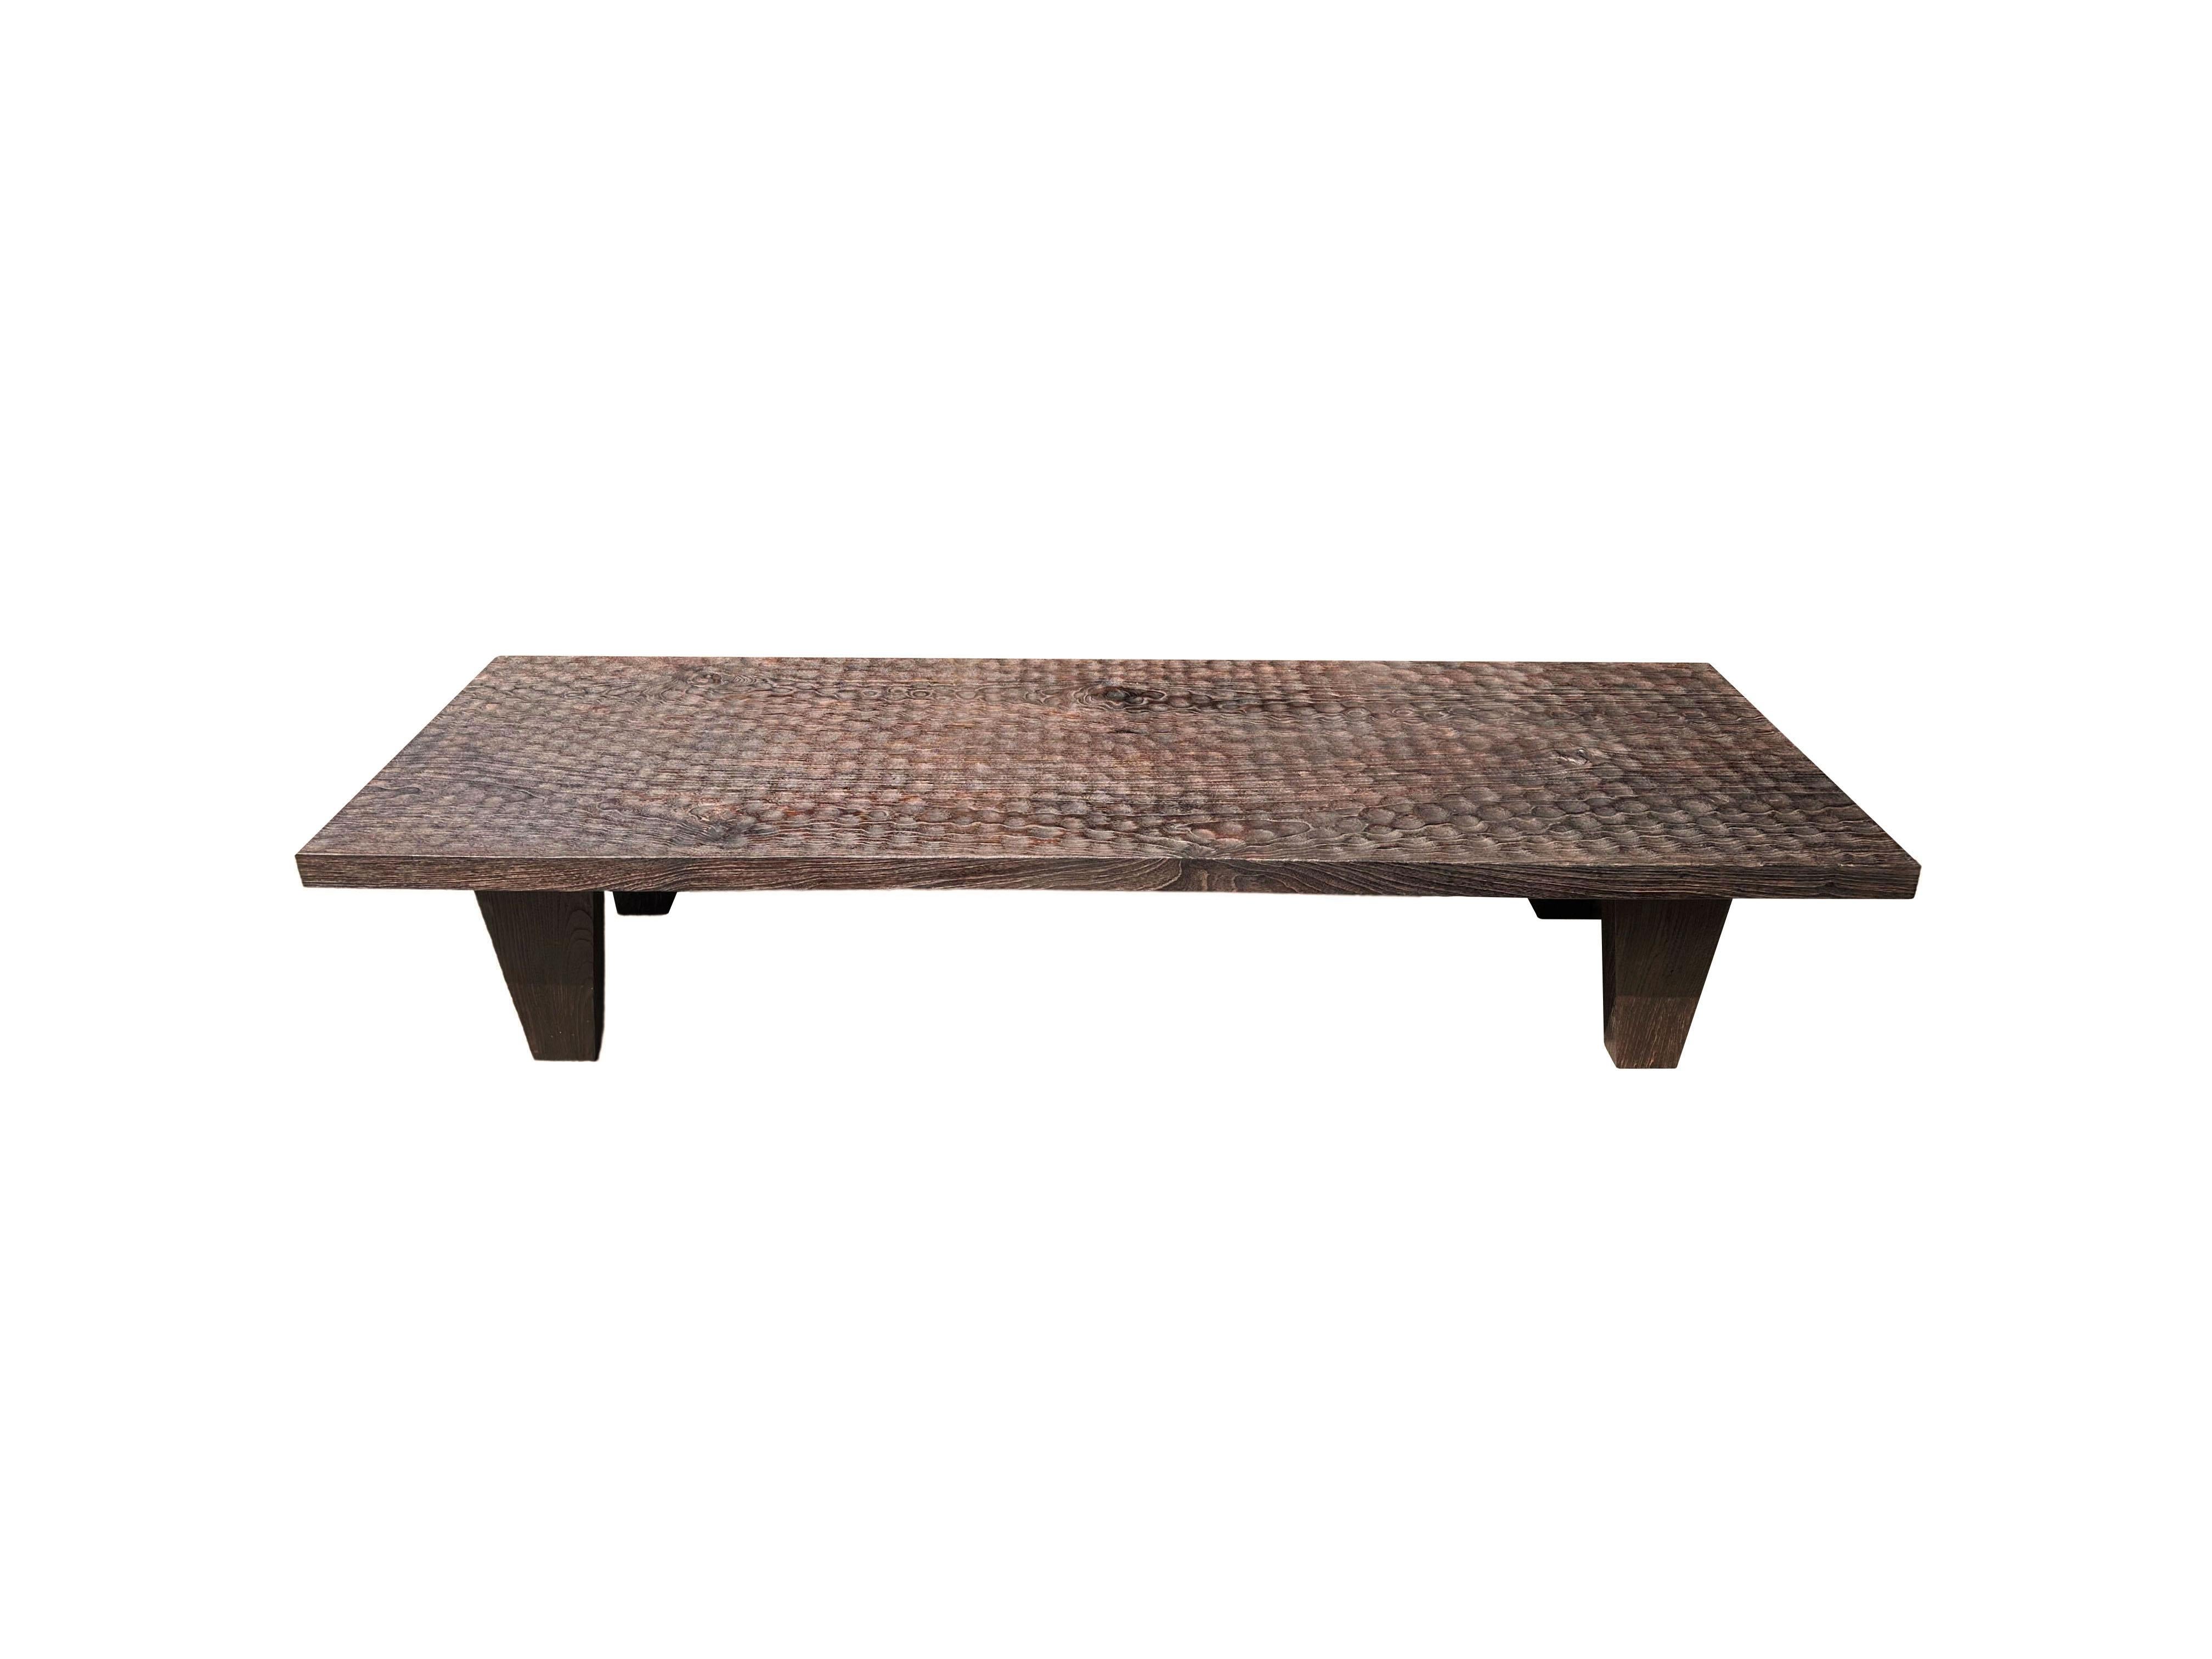 Indonesian Suar Wood Table Hand-Hewn Detailing Espresso Finish, Modern Organic For Sale